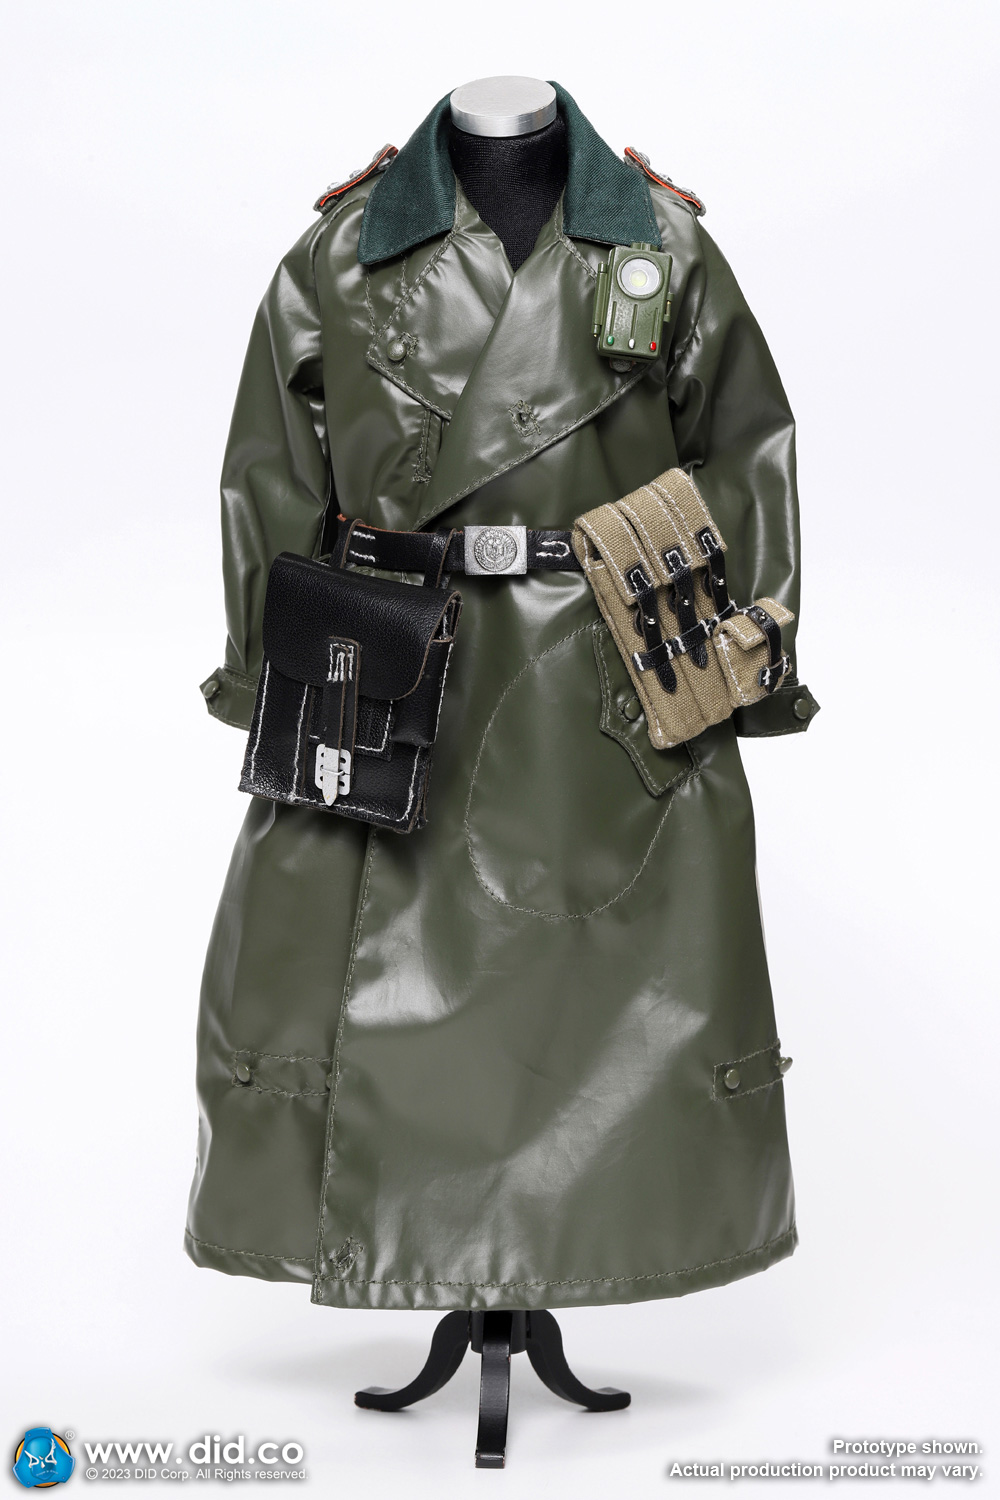 Richard - NEW PRODUCT: DiD: D80166 WWII German Military Policeman – Richard 1/6 scale action figure 4412